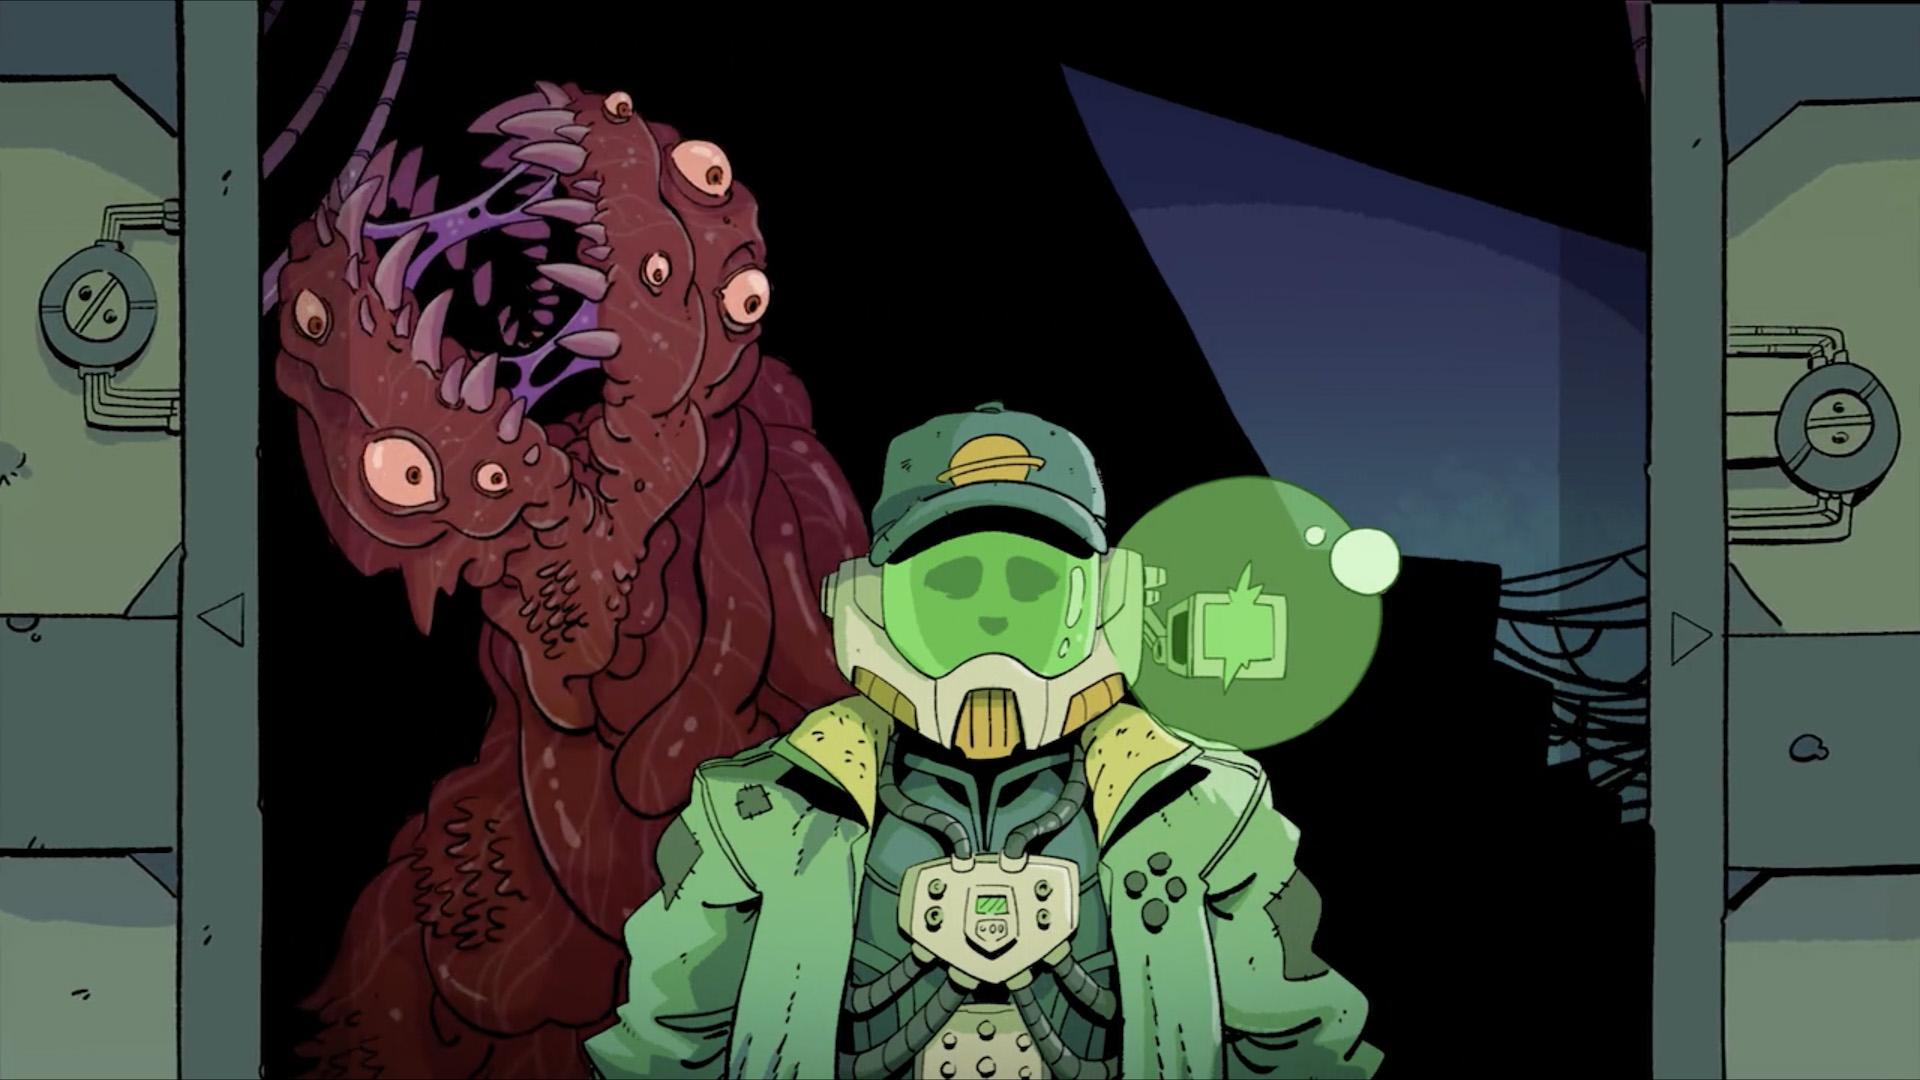 A space trucker, a snap-back perched atop his helmeted head, with a tentacle-friends step through an airlock.